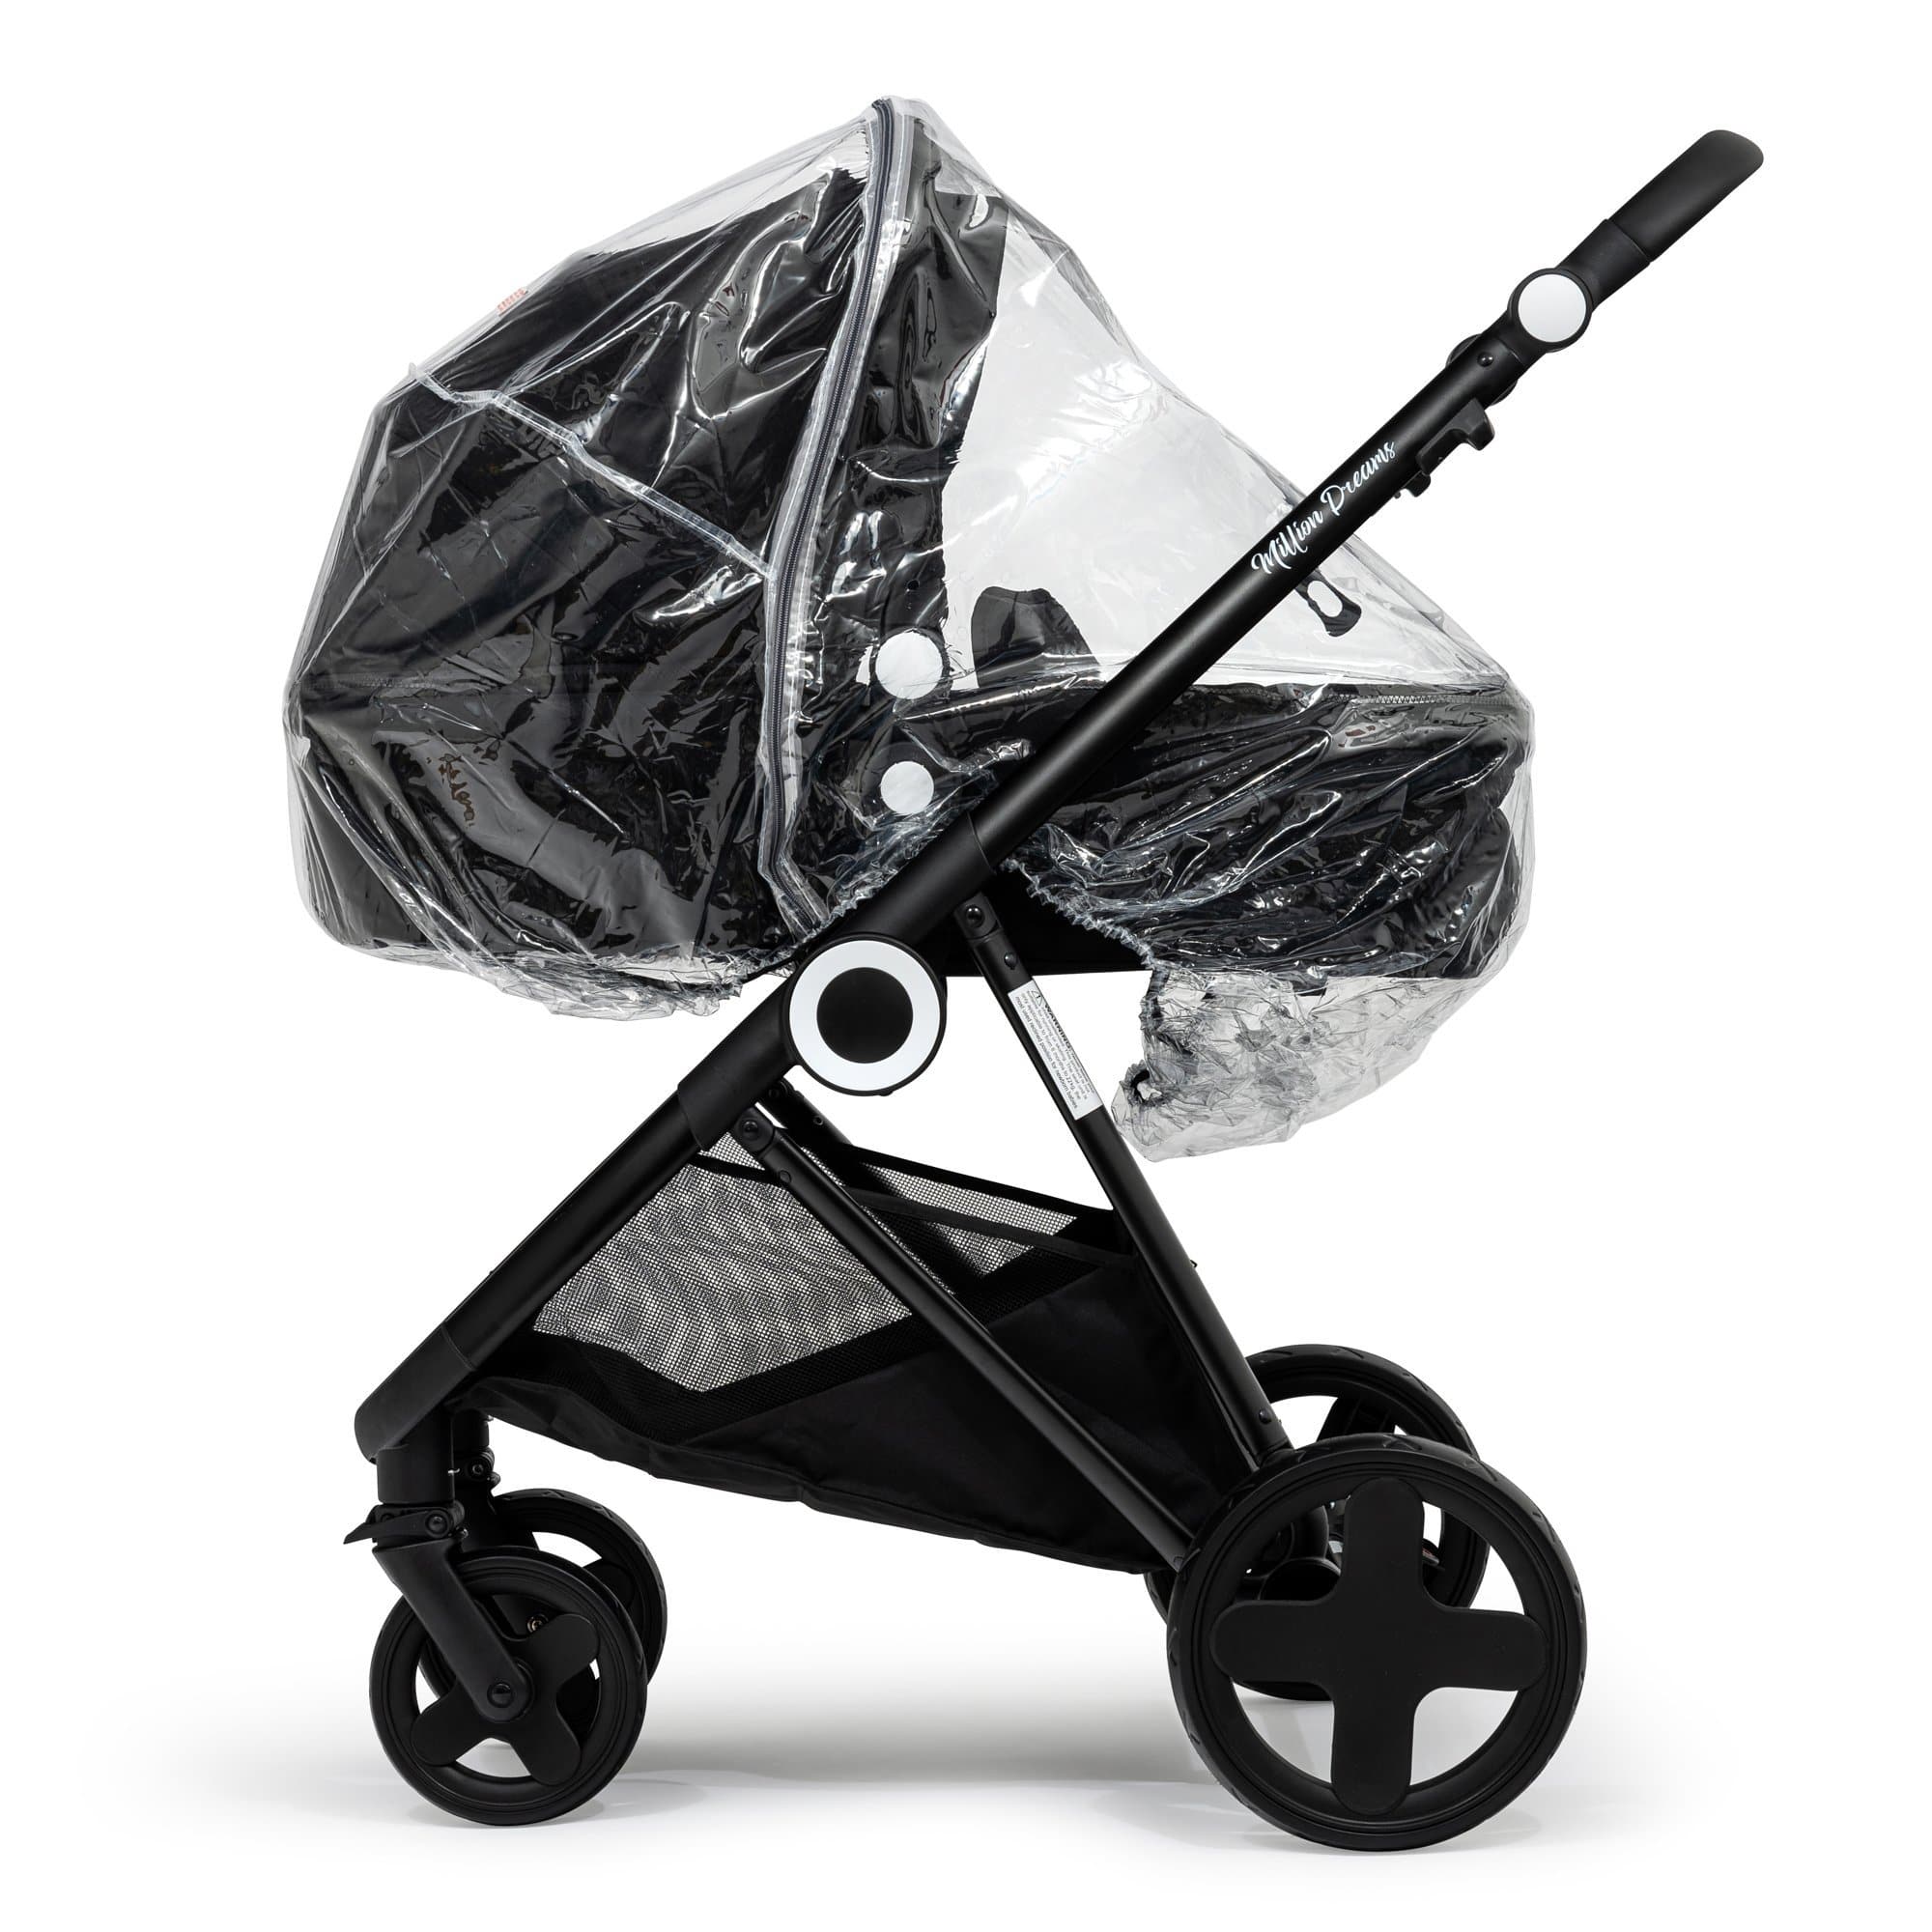 2 in 1 Rain Cover Compatible with Chicco - Fits All Models - For Your Little One